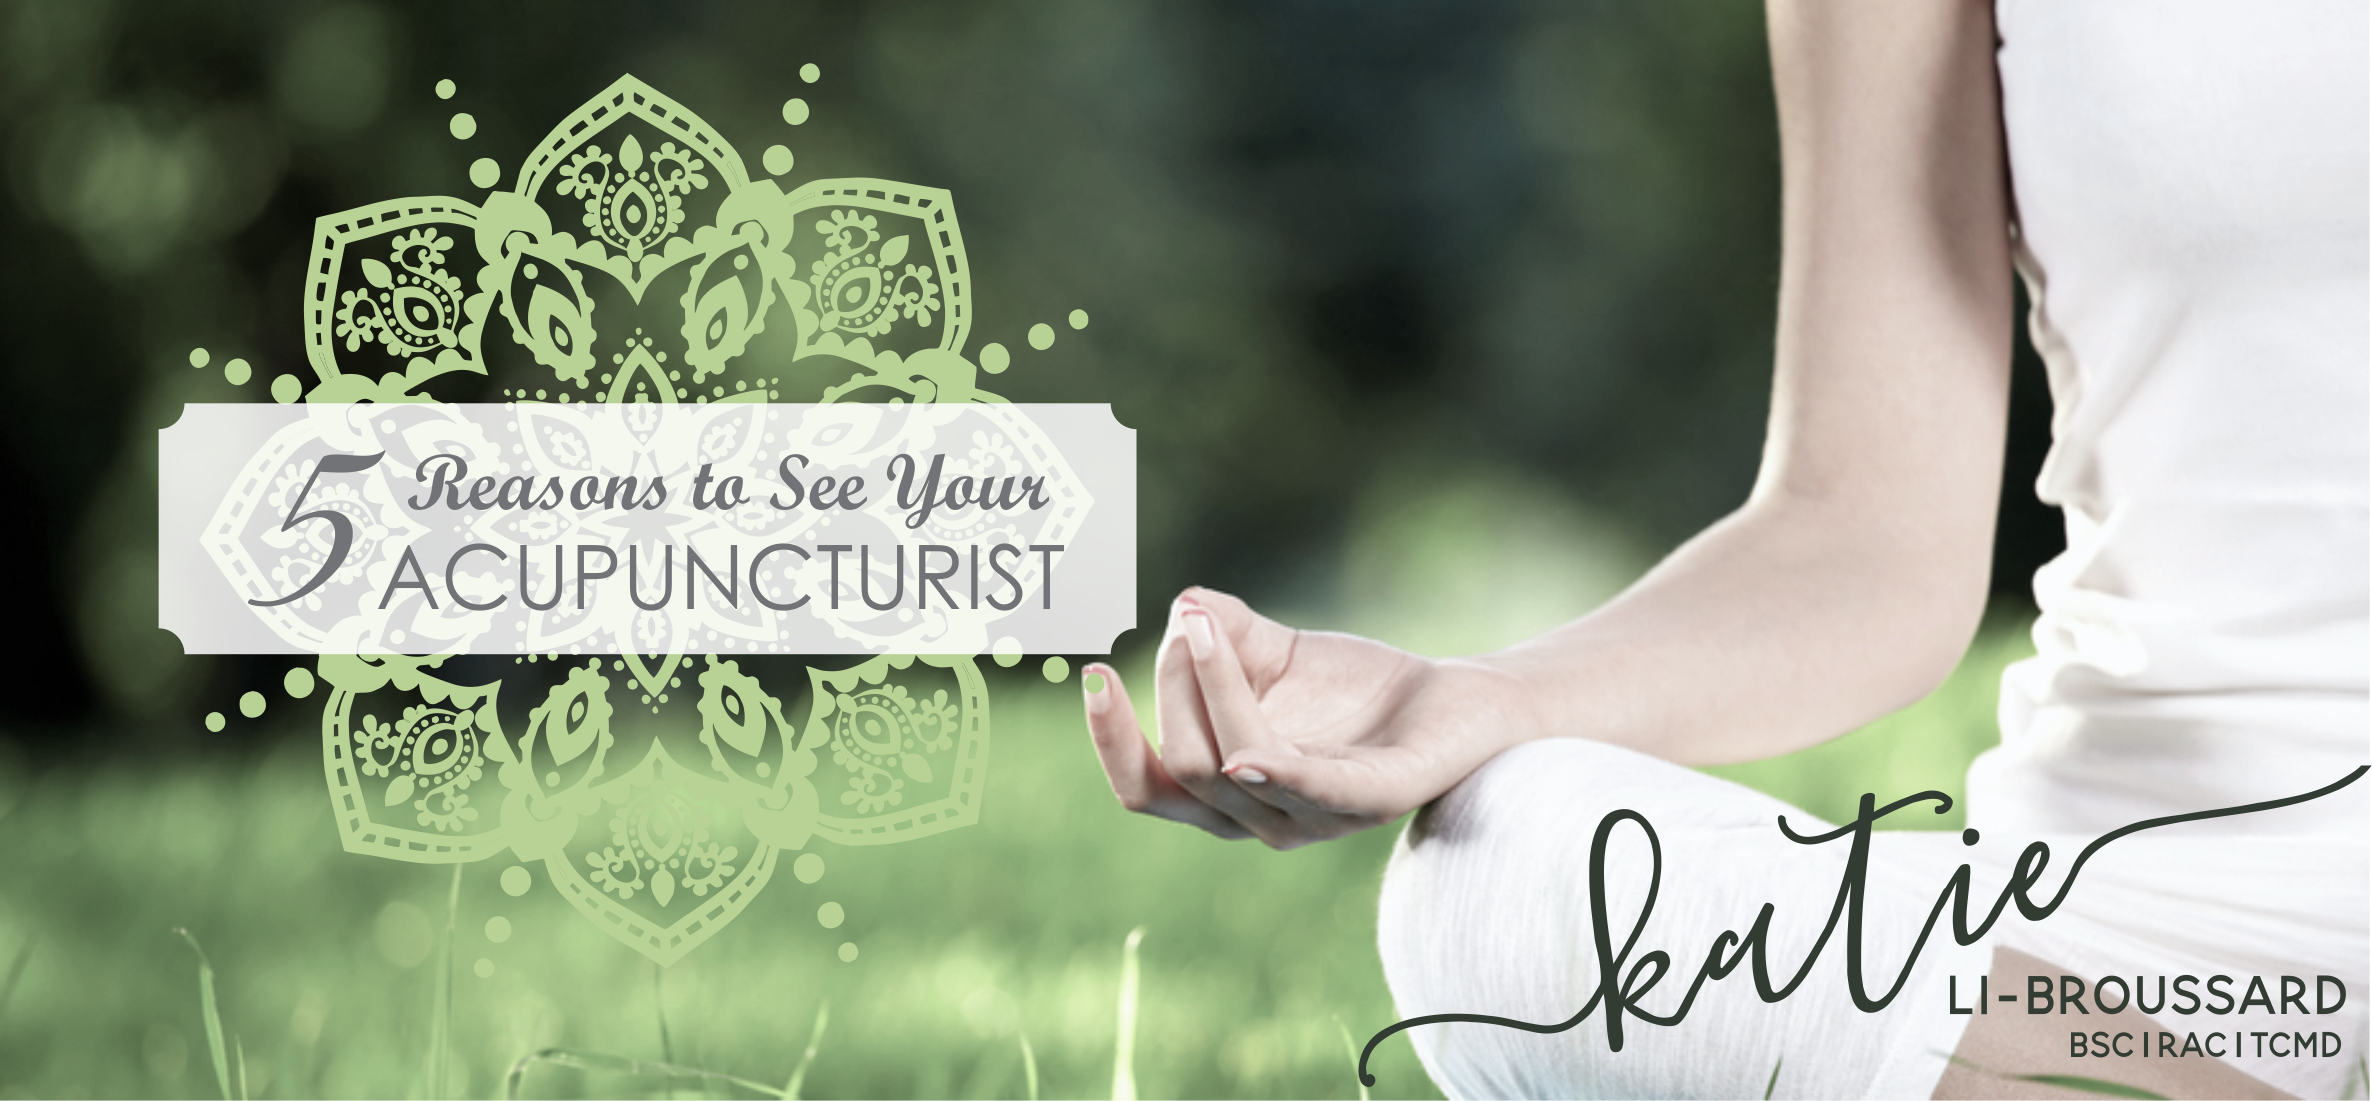 5 Reasons to See Your Acupuncturist